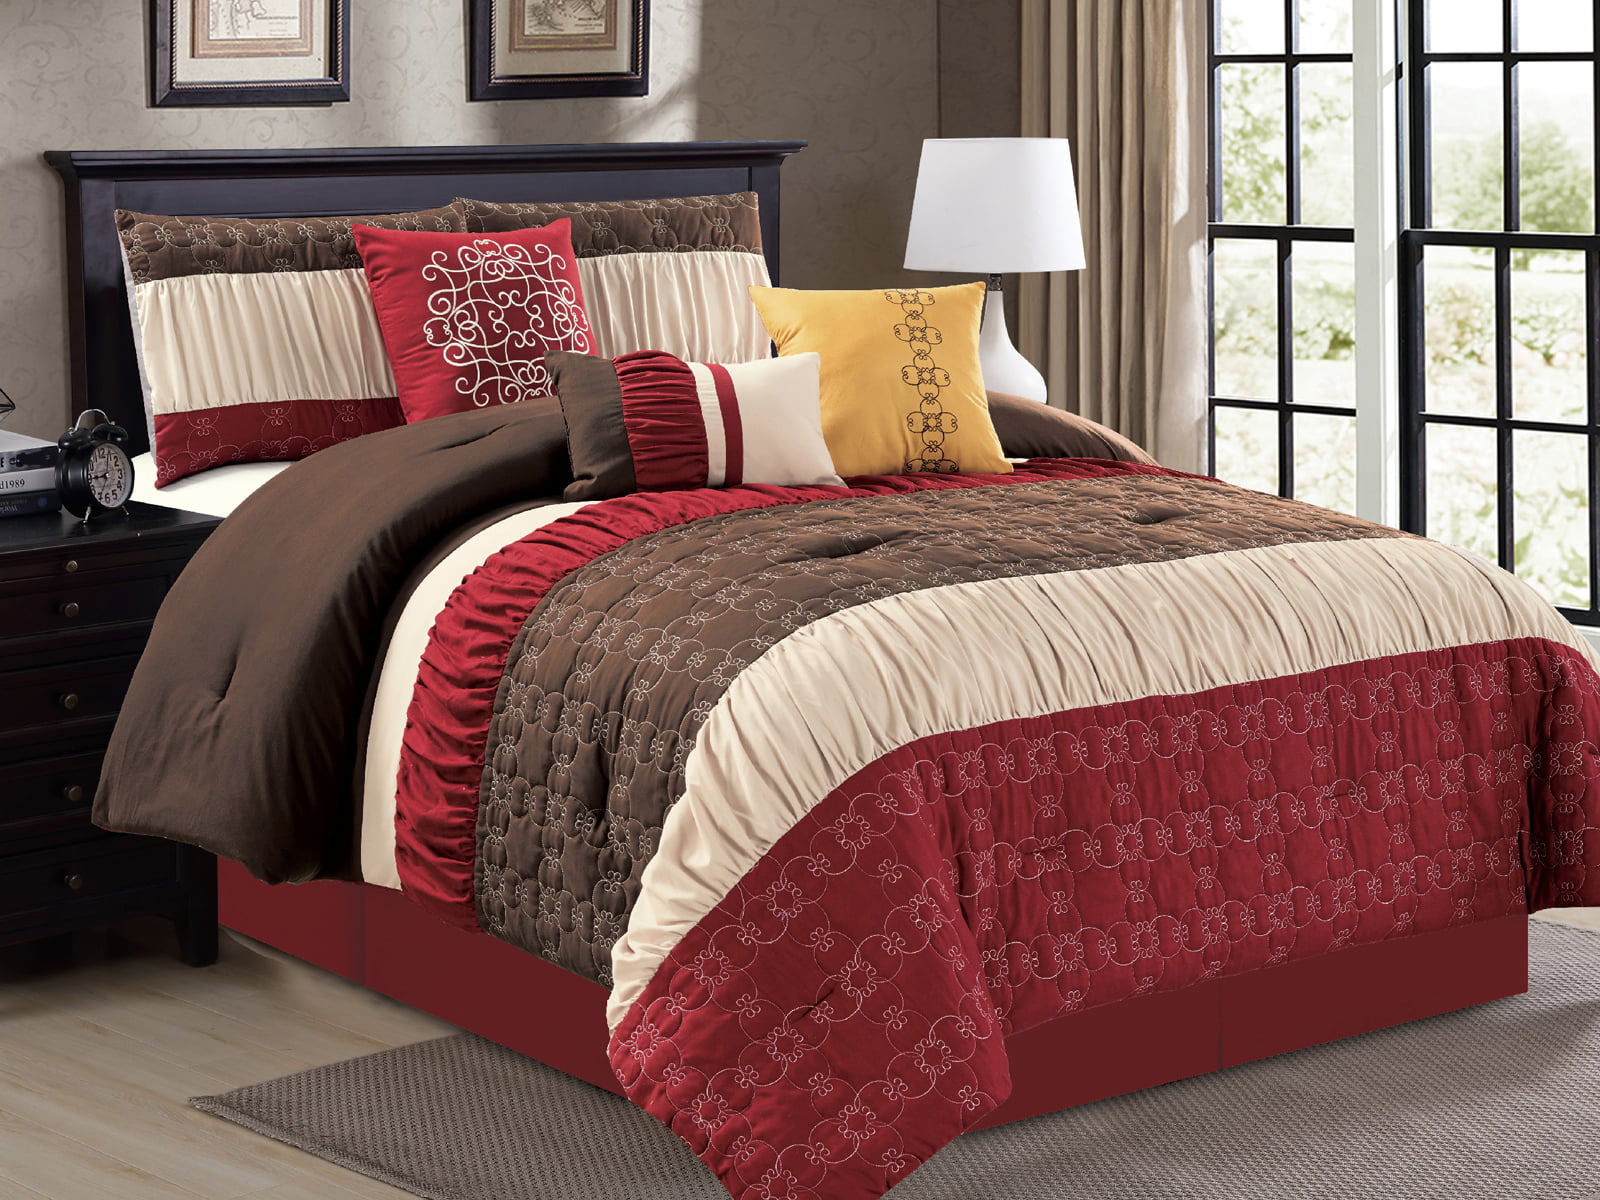 7-Pc Quilted Floral Damask Scroll Ruffled Comforter Set Burgundy Brown ...